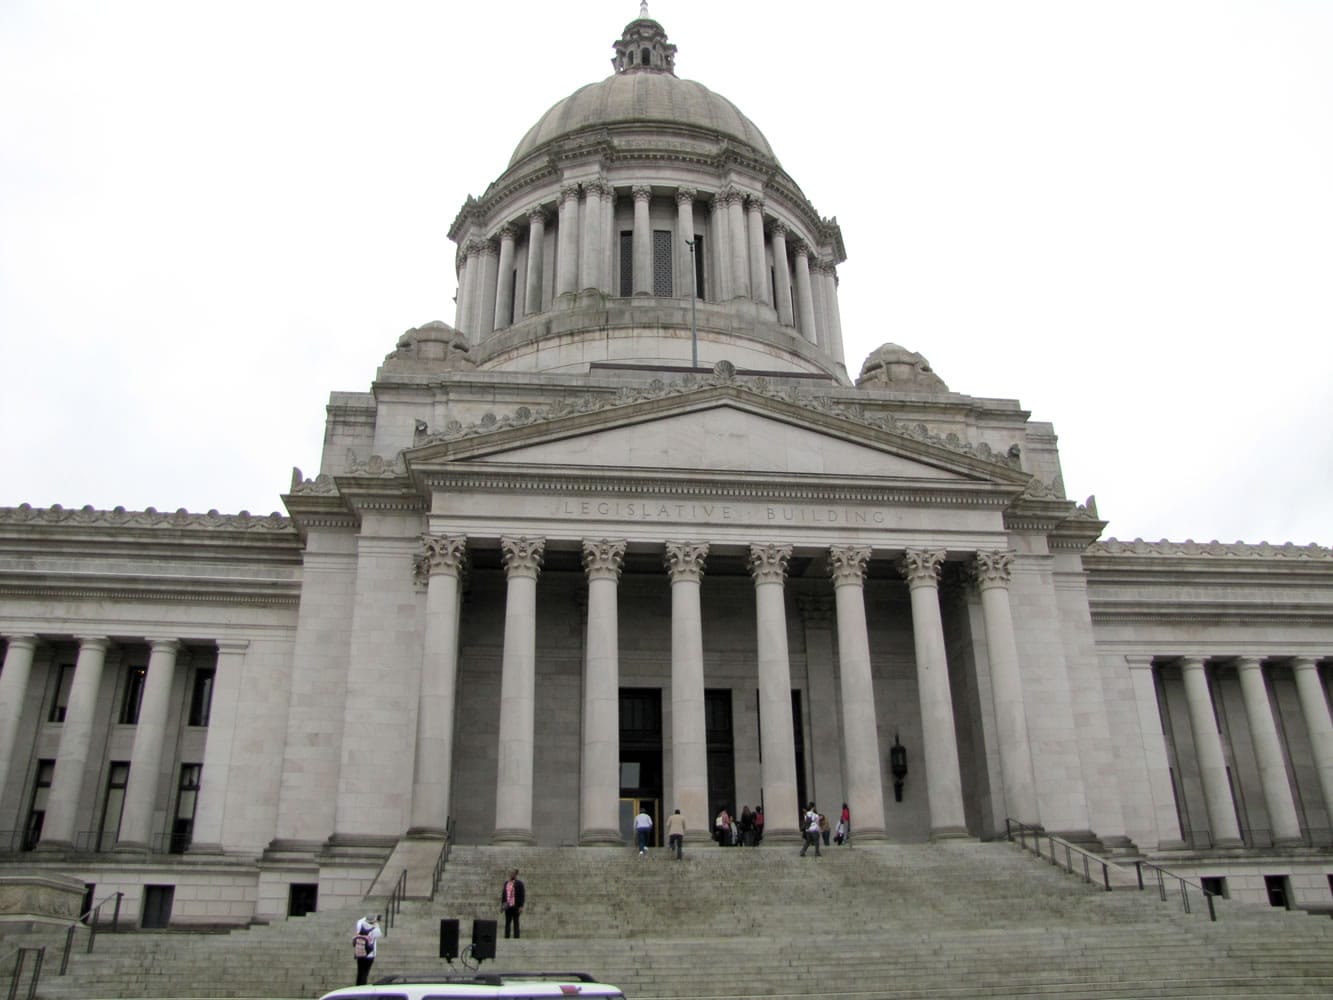 The legislative building in Olympia houses the Senate and House chambers.